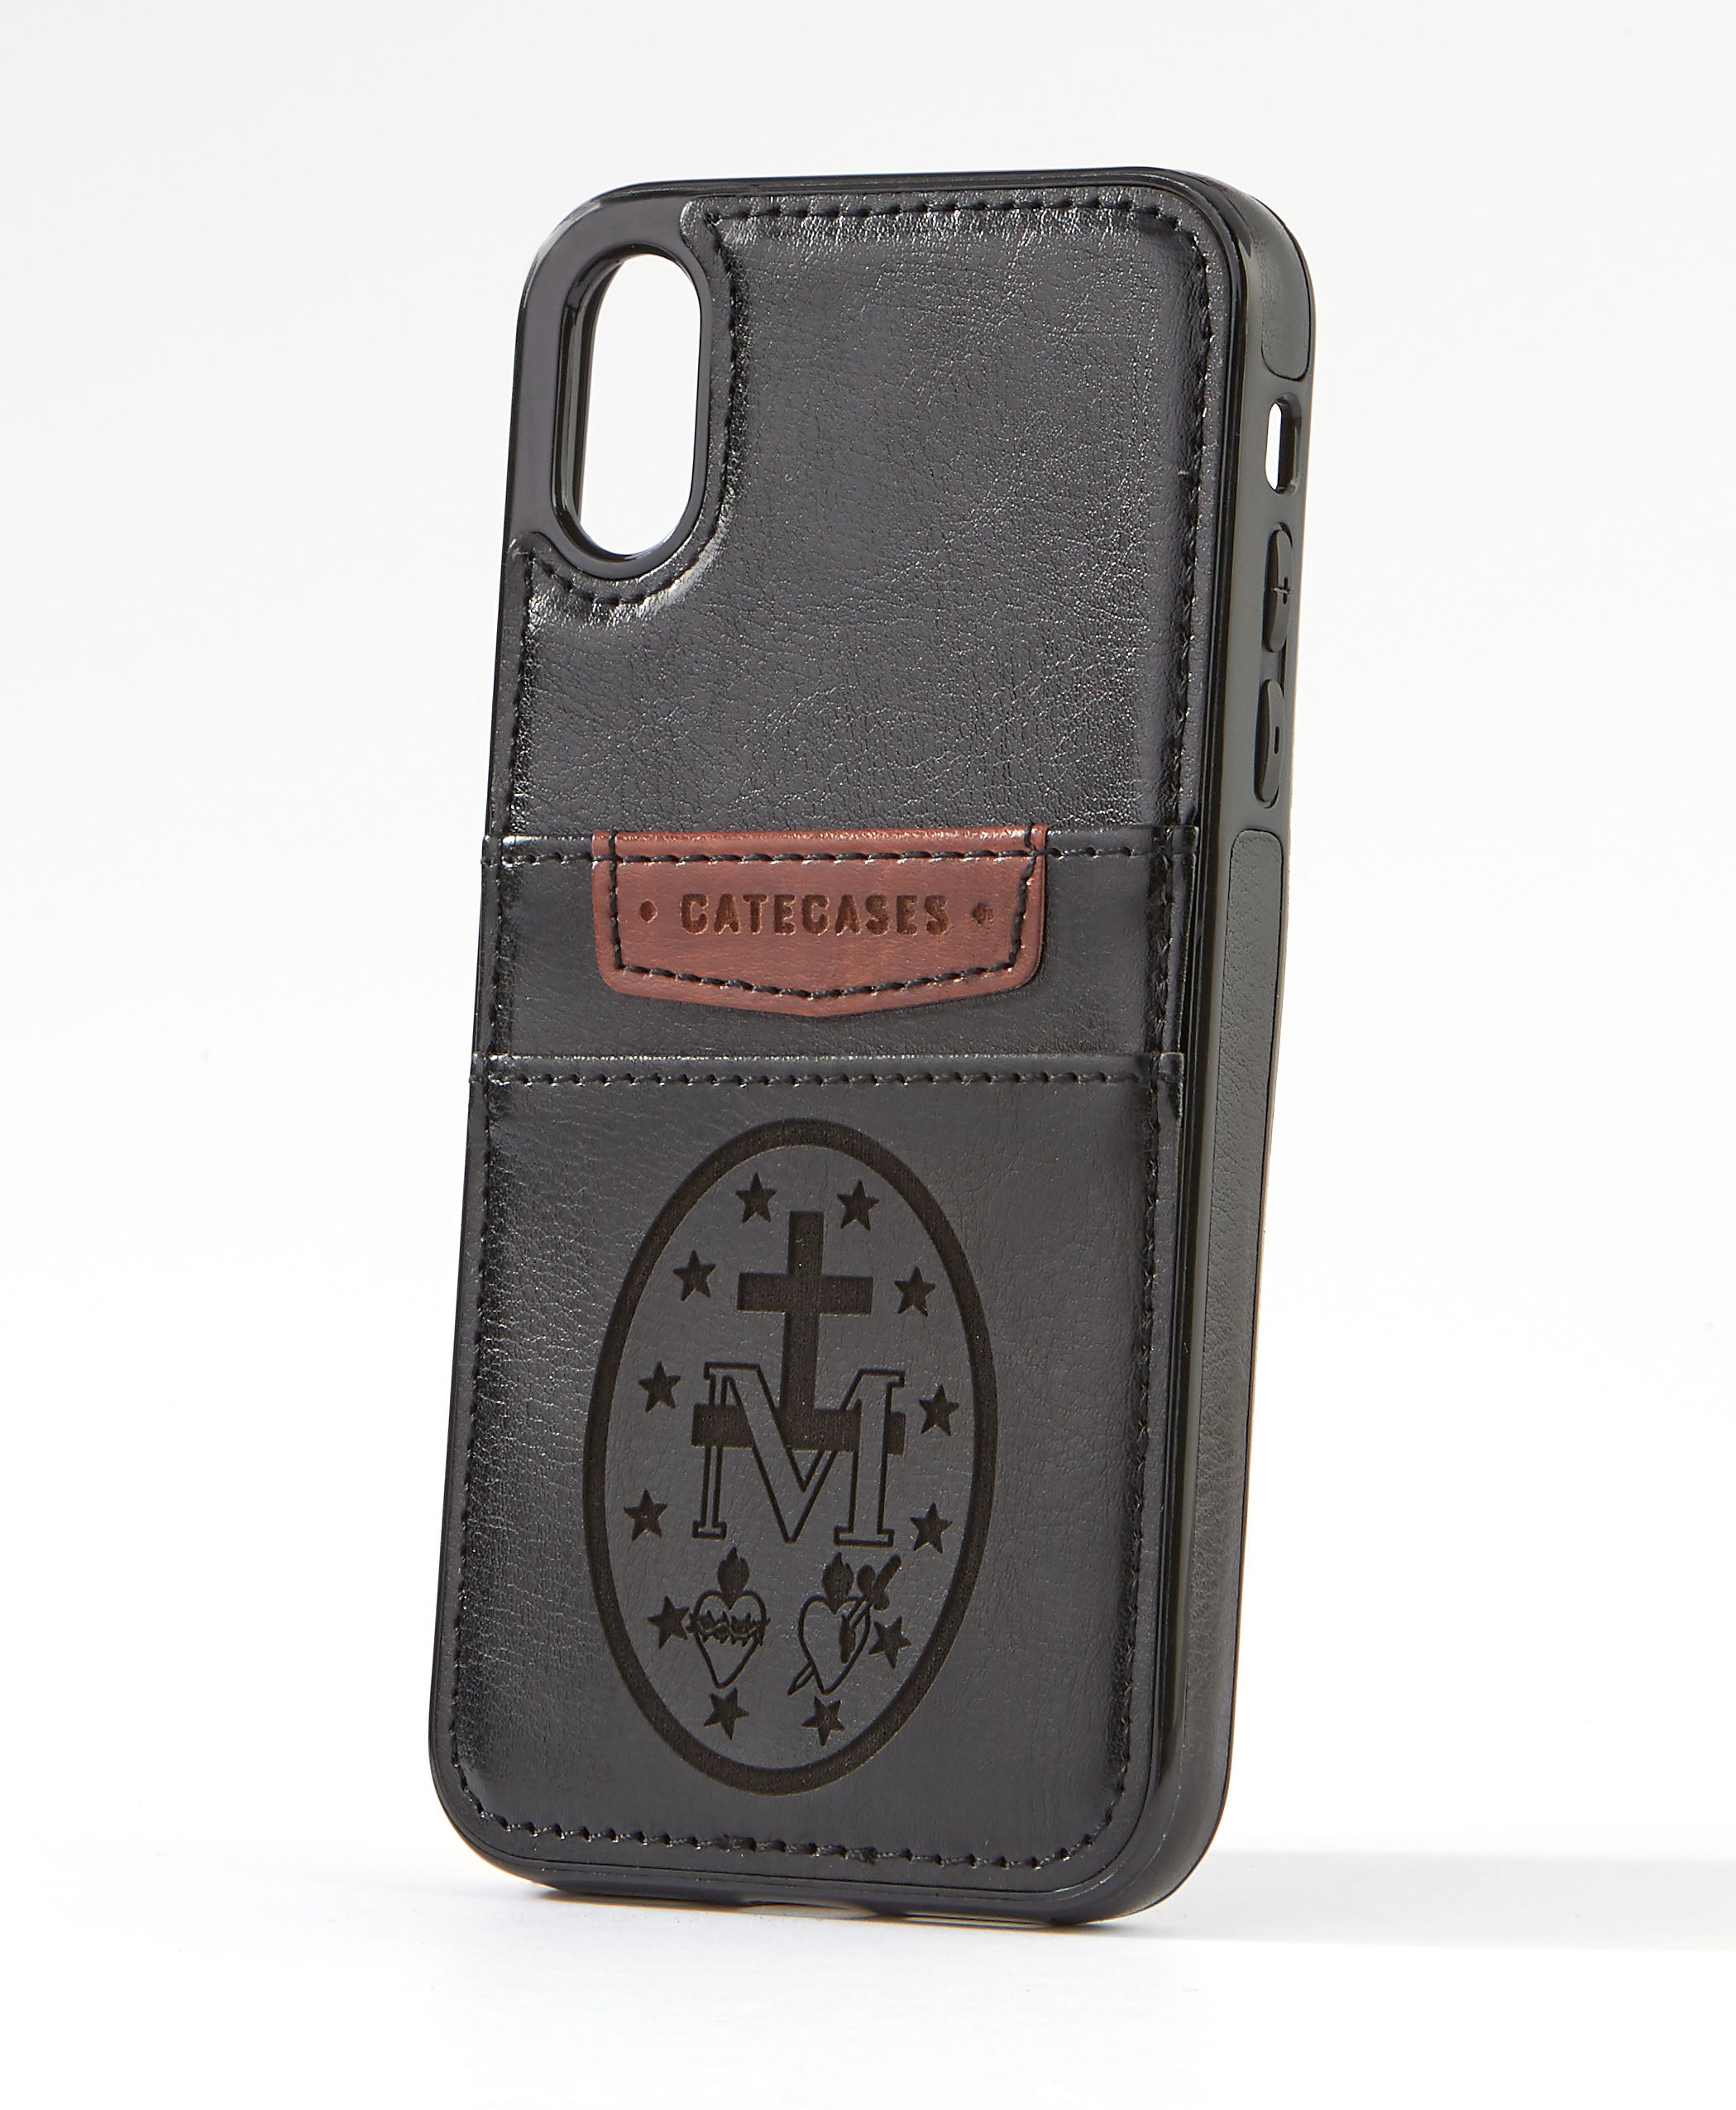 Miraculous Medal Black Leather Card Case for iPhone XR